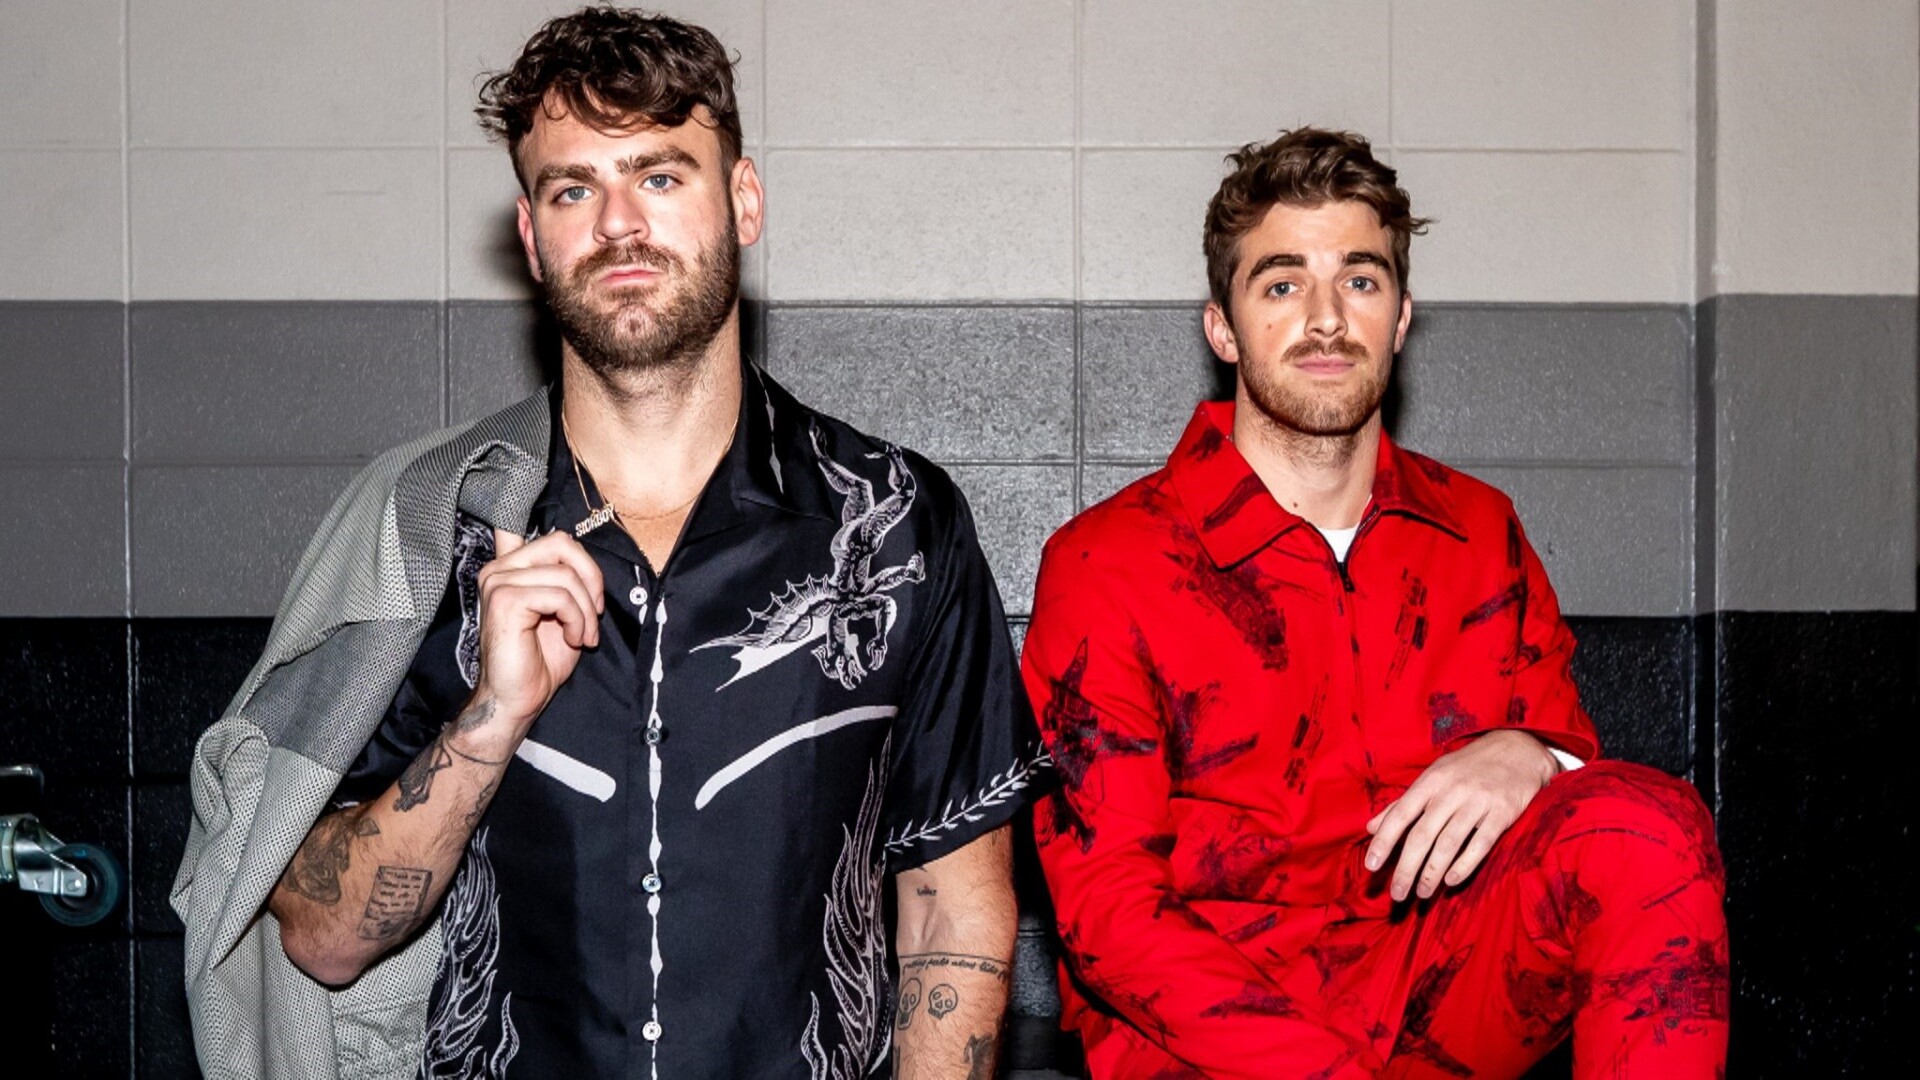 The Chainsmokers, New single teaser, Highly anticipated release, Music excitement, 1920x1080 Full HD Desktop